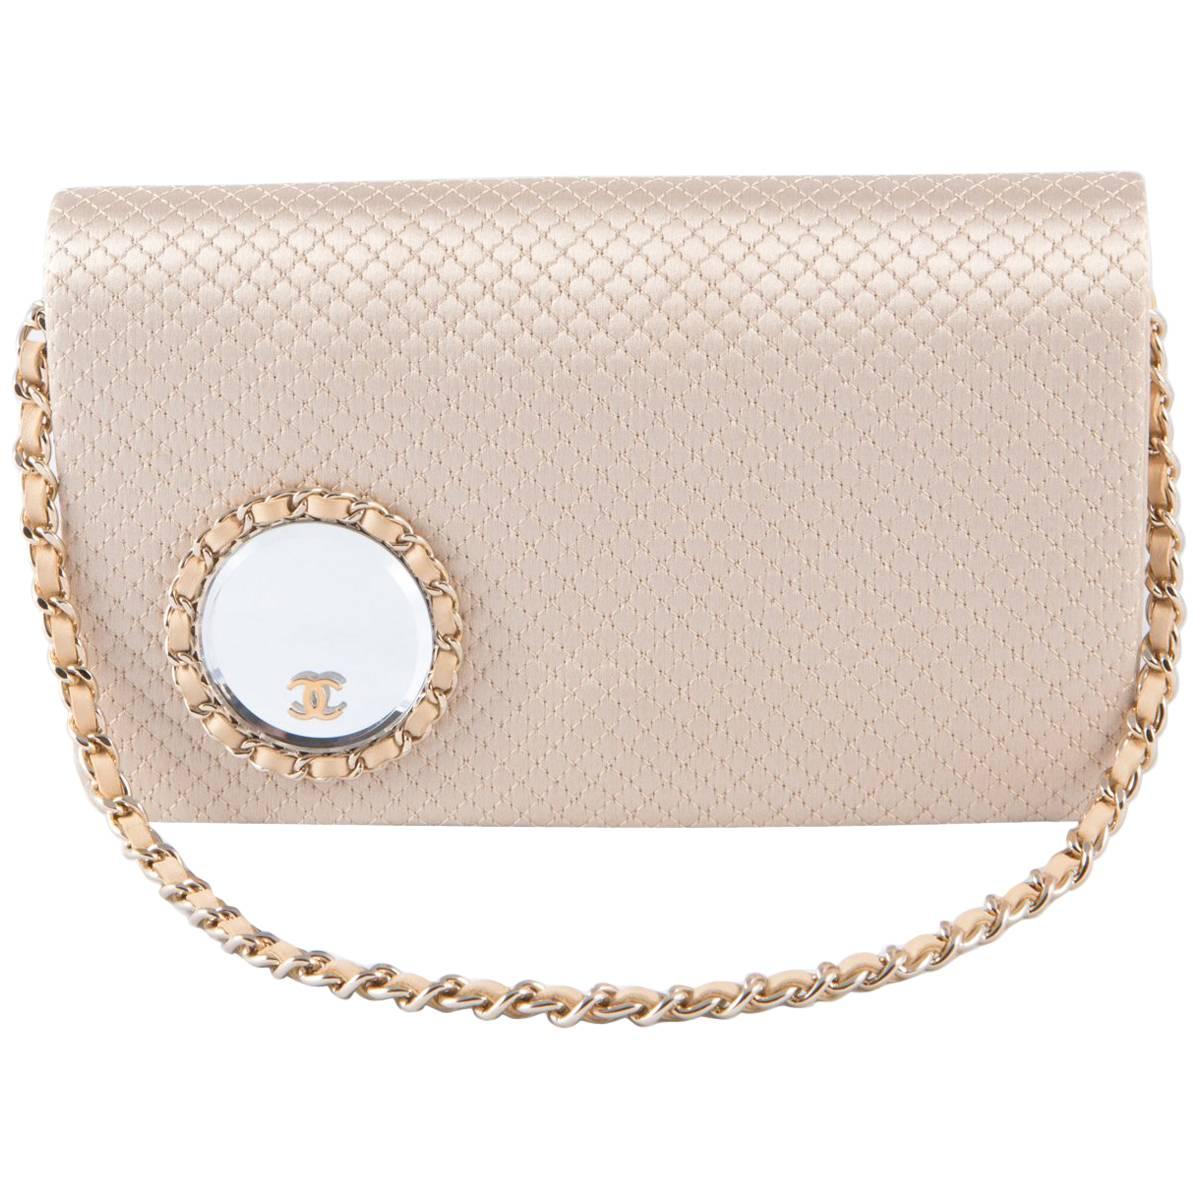 Evening Chanel Satin Quilted Clutch